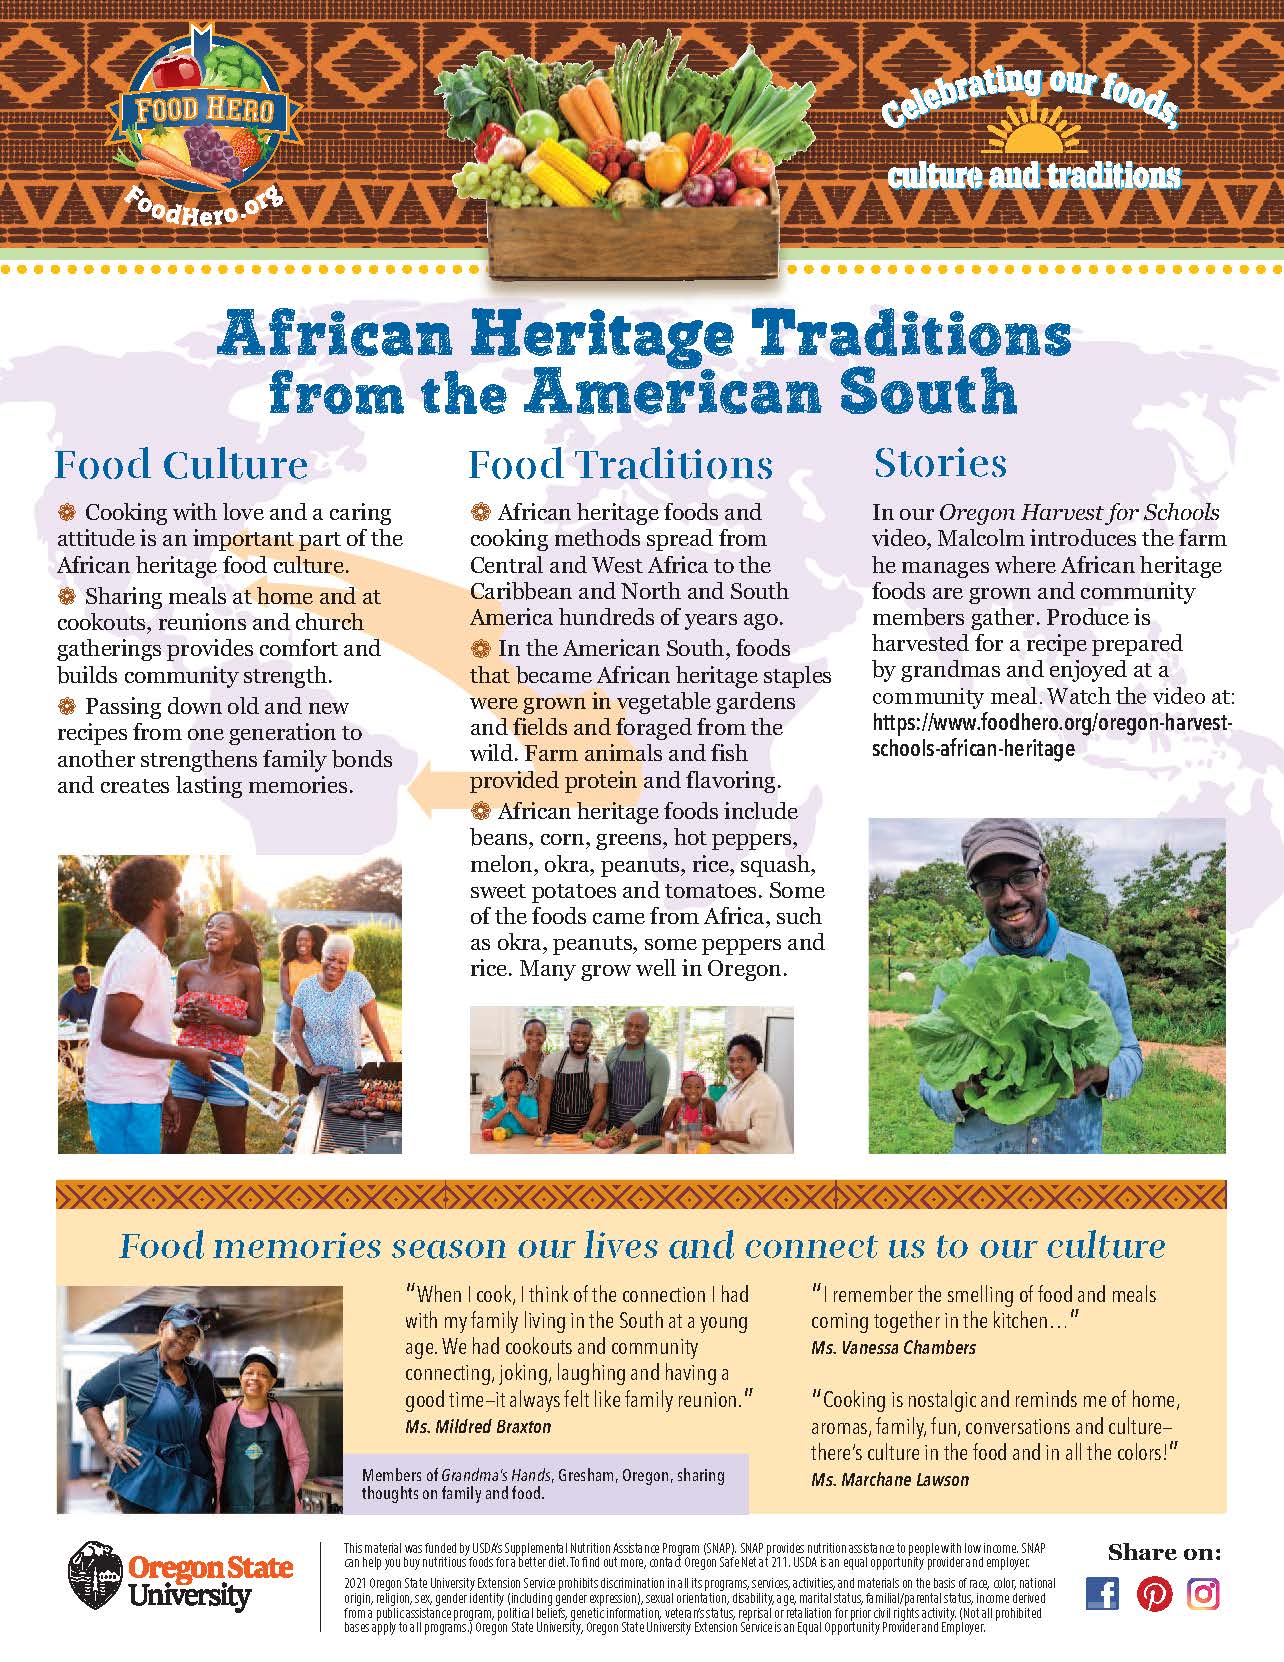 African Heritage Traditions from the American South Magazine Image